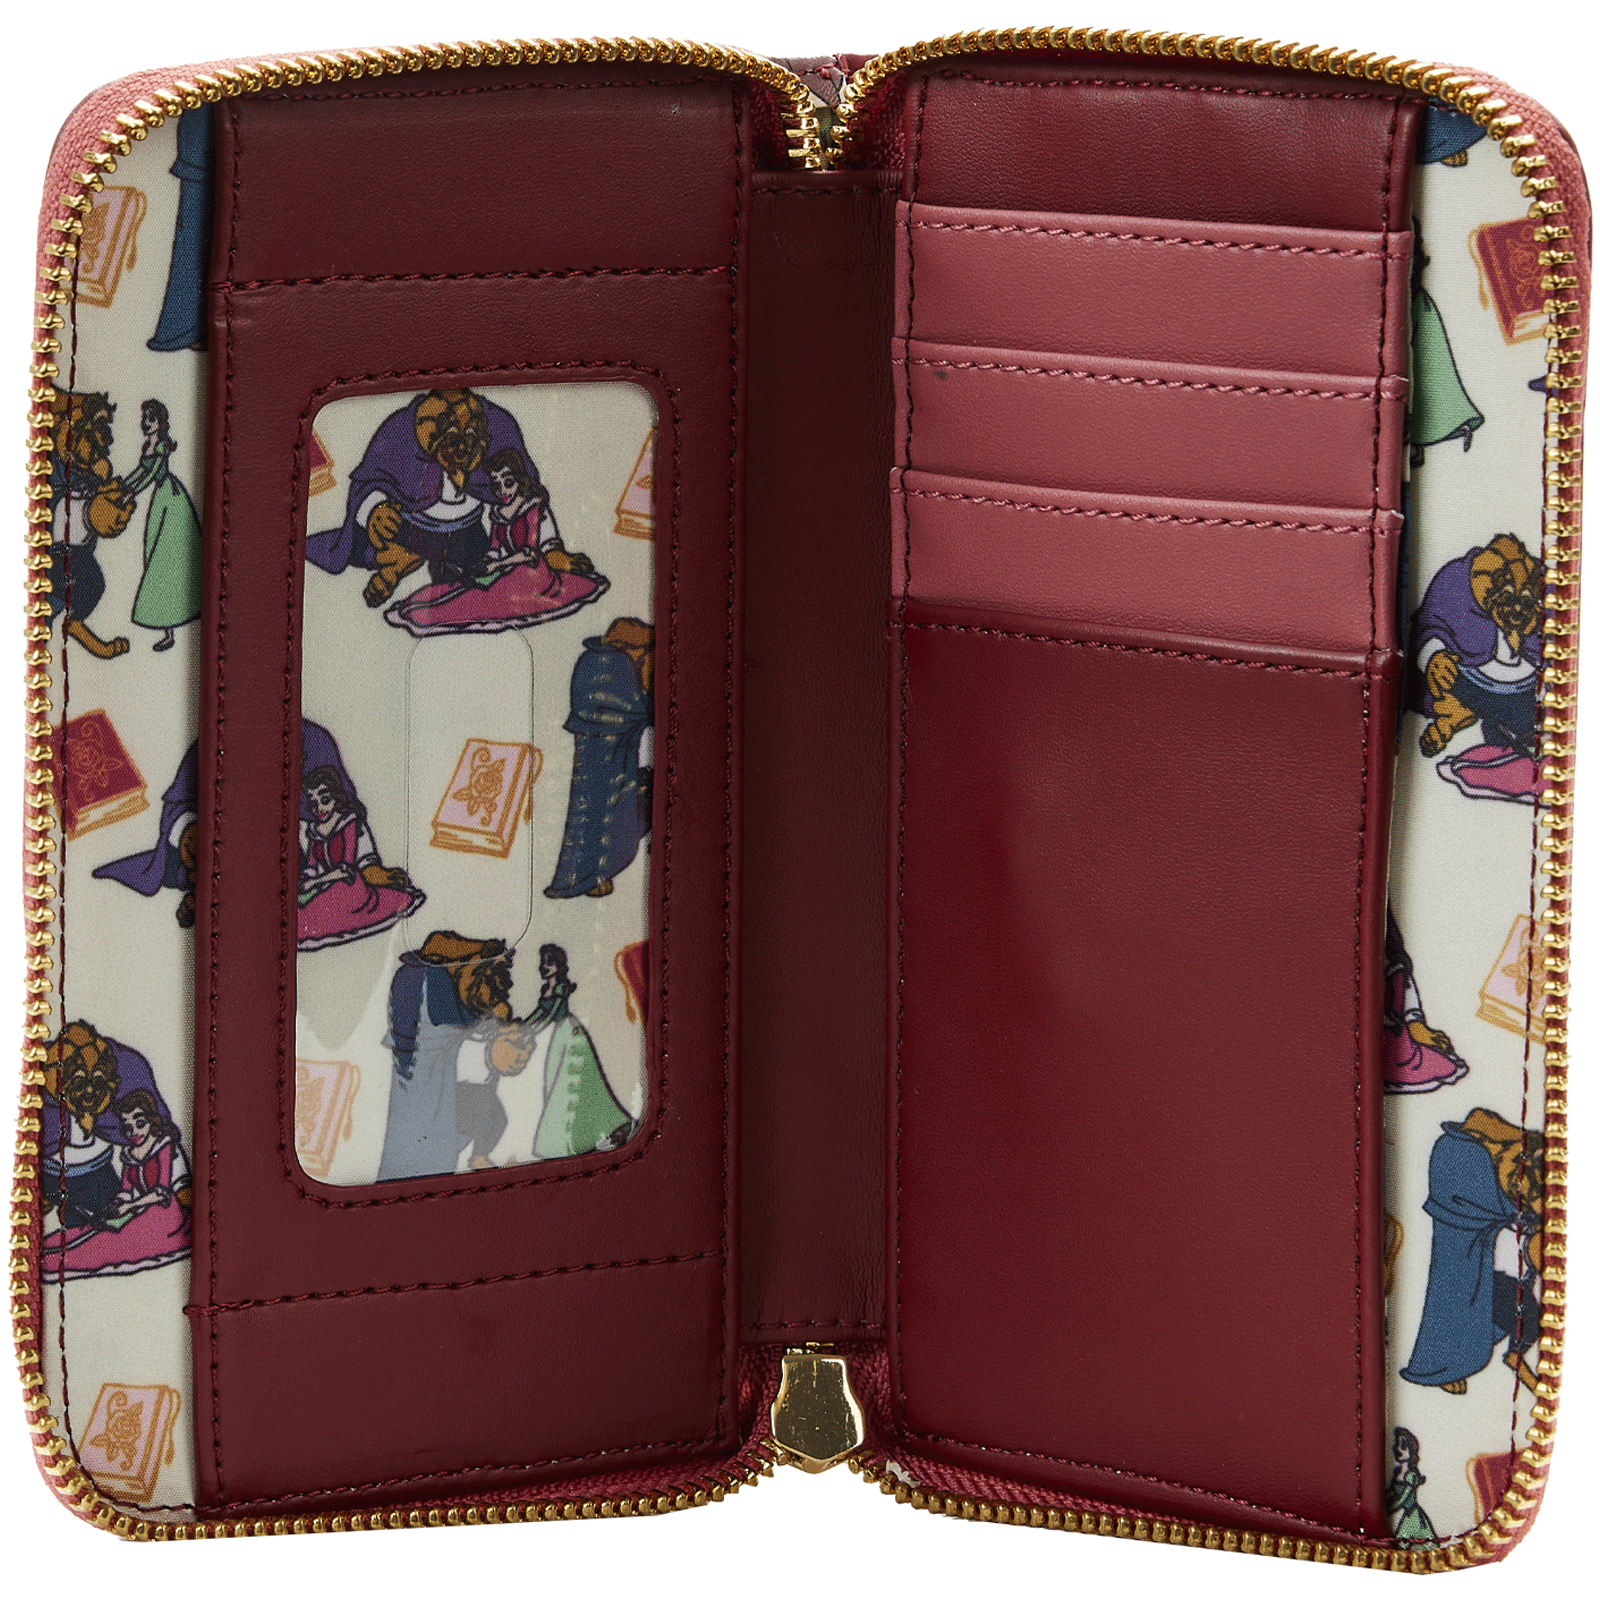 Loungefly x Disney Beauty and the Beast Fireplace Scene Wallet